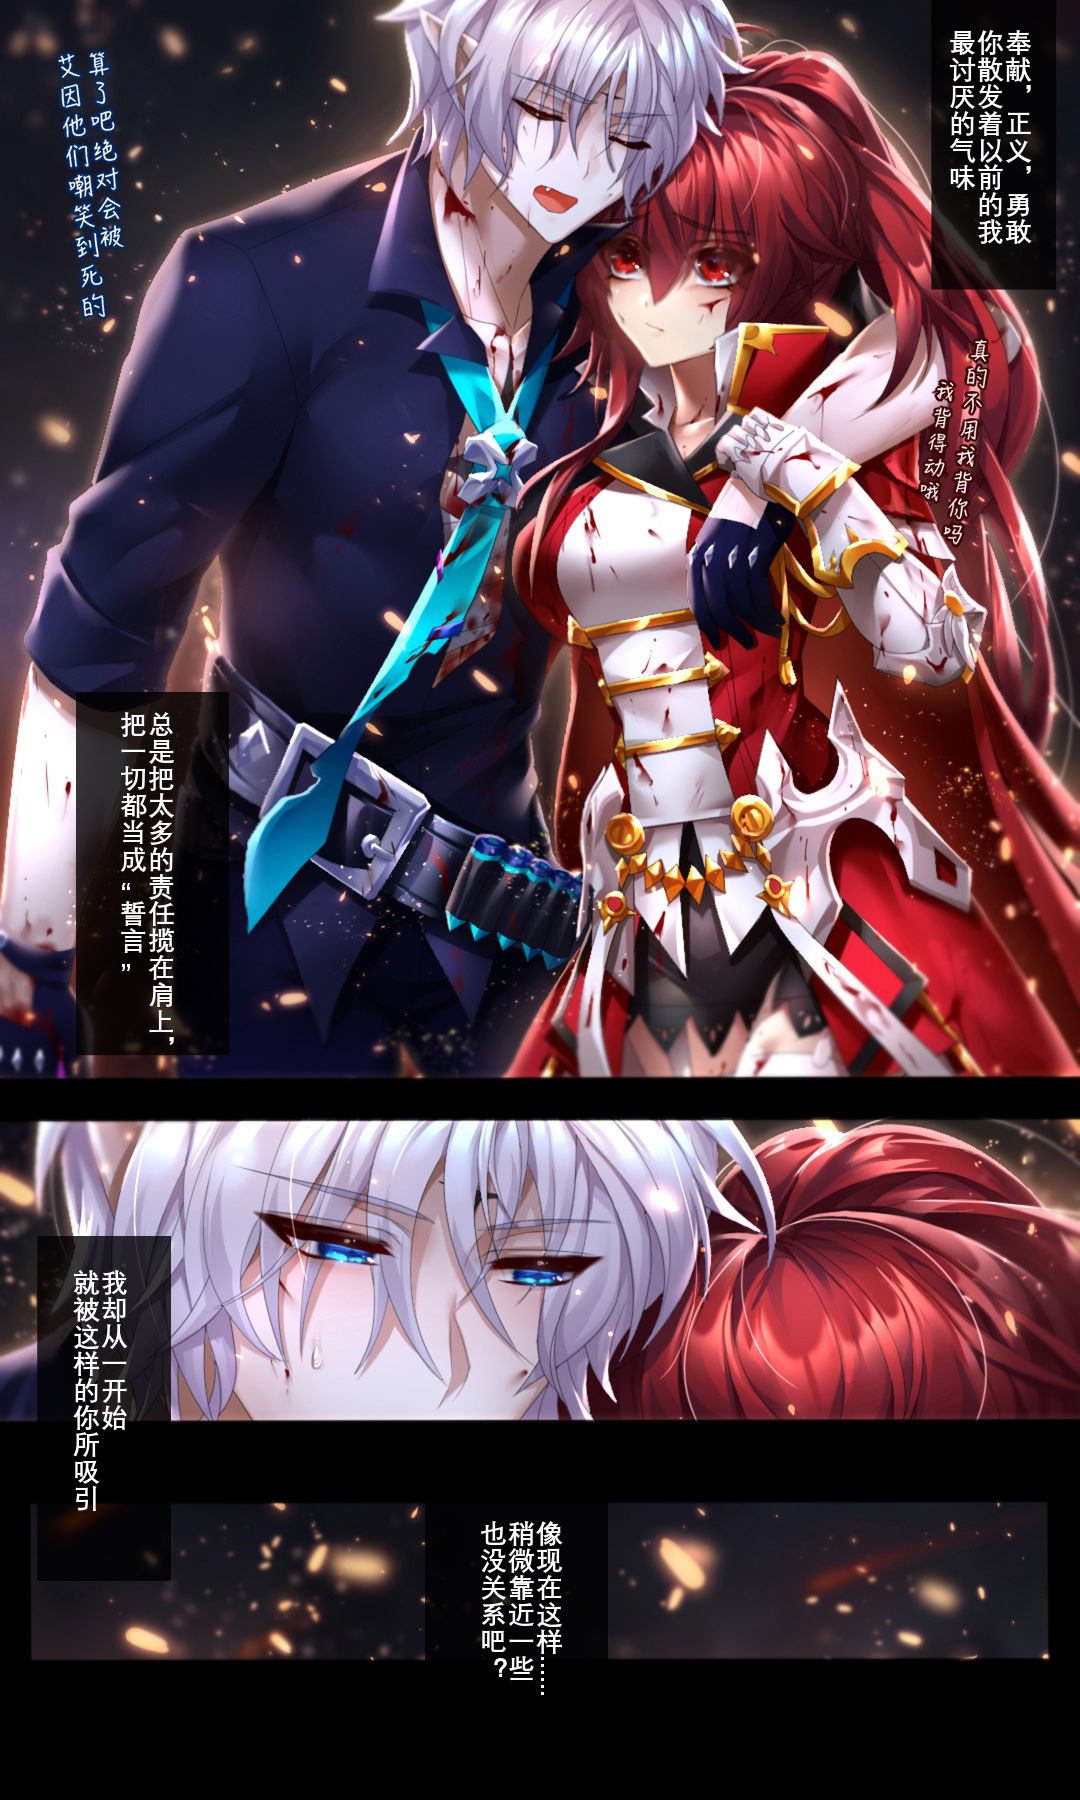 [Been] As you wish (Elsword) [Chinese] [Been] As you wish (エルソード) [中国語]